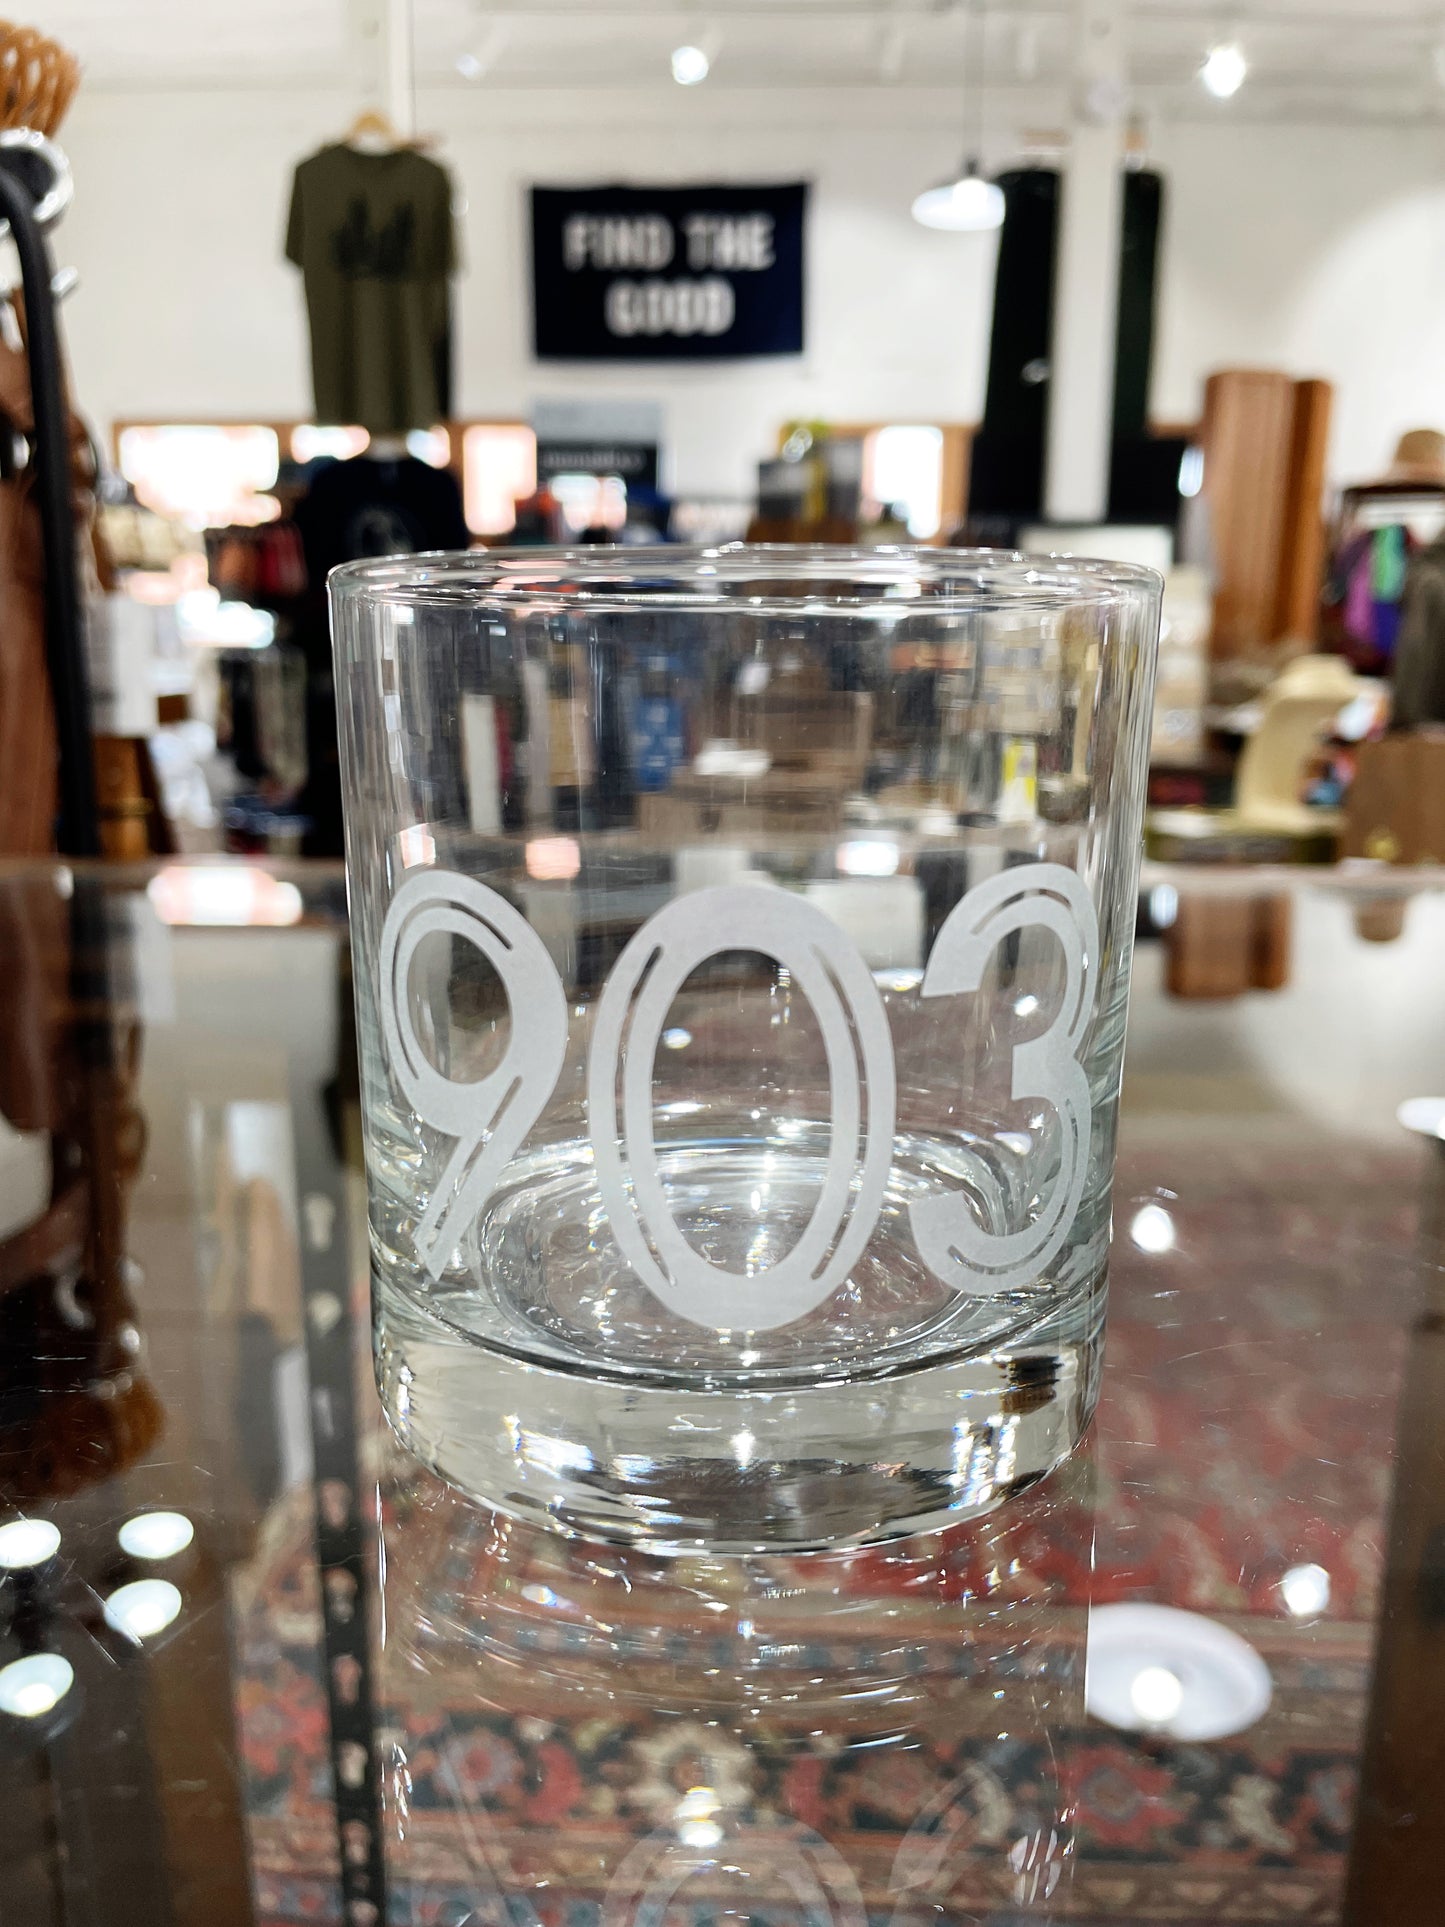 "903" Etched Glassware